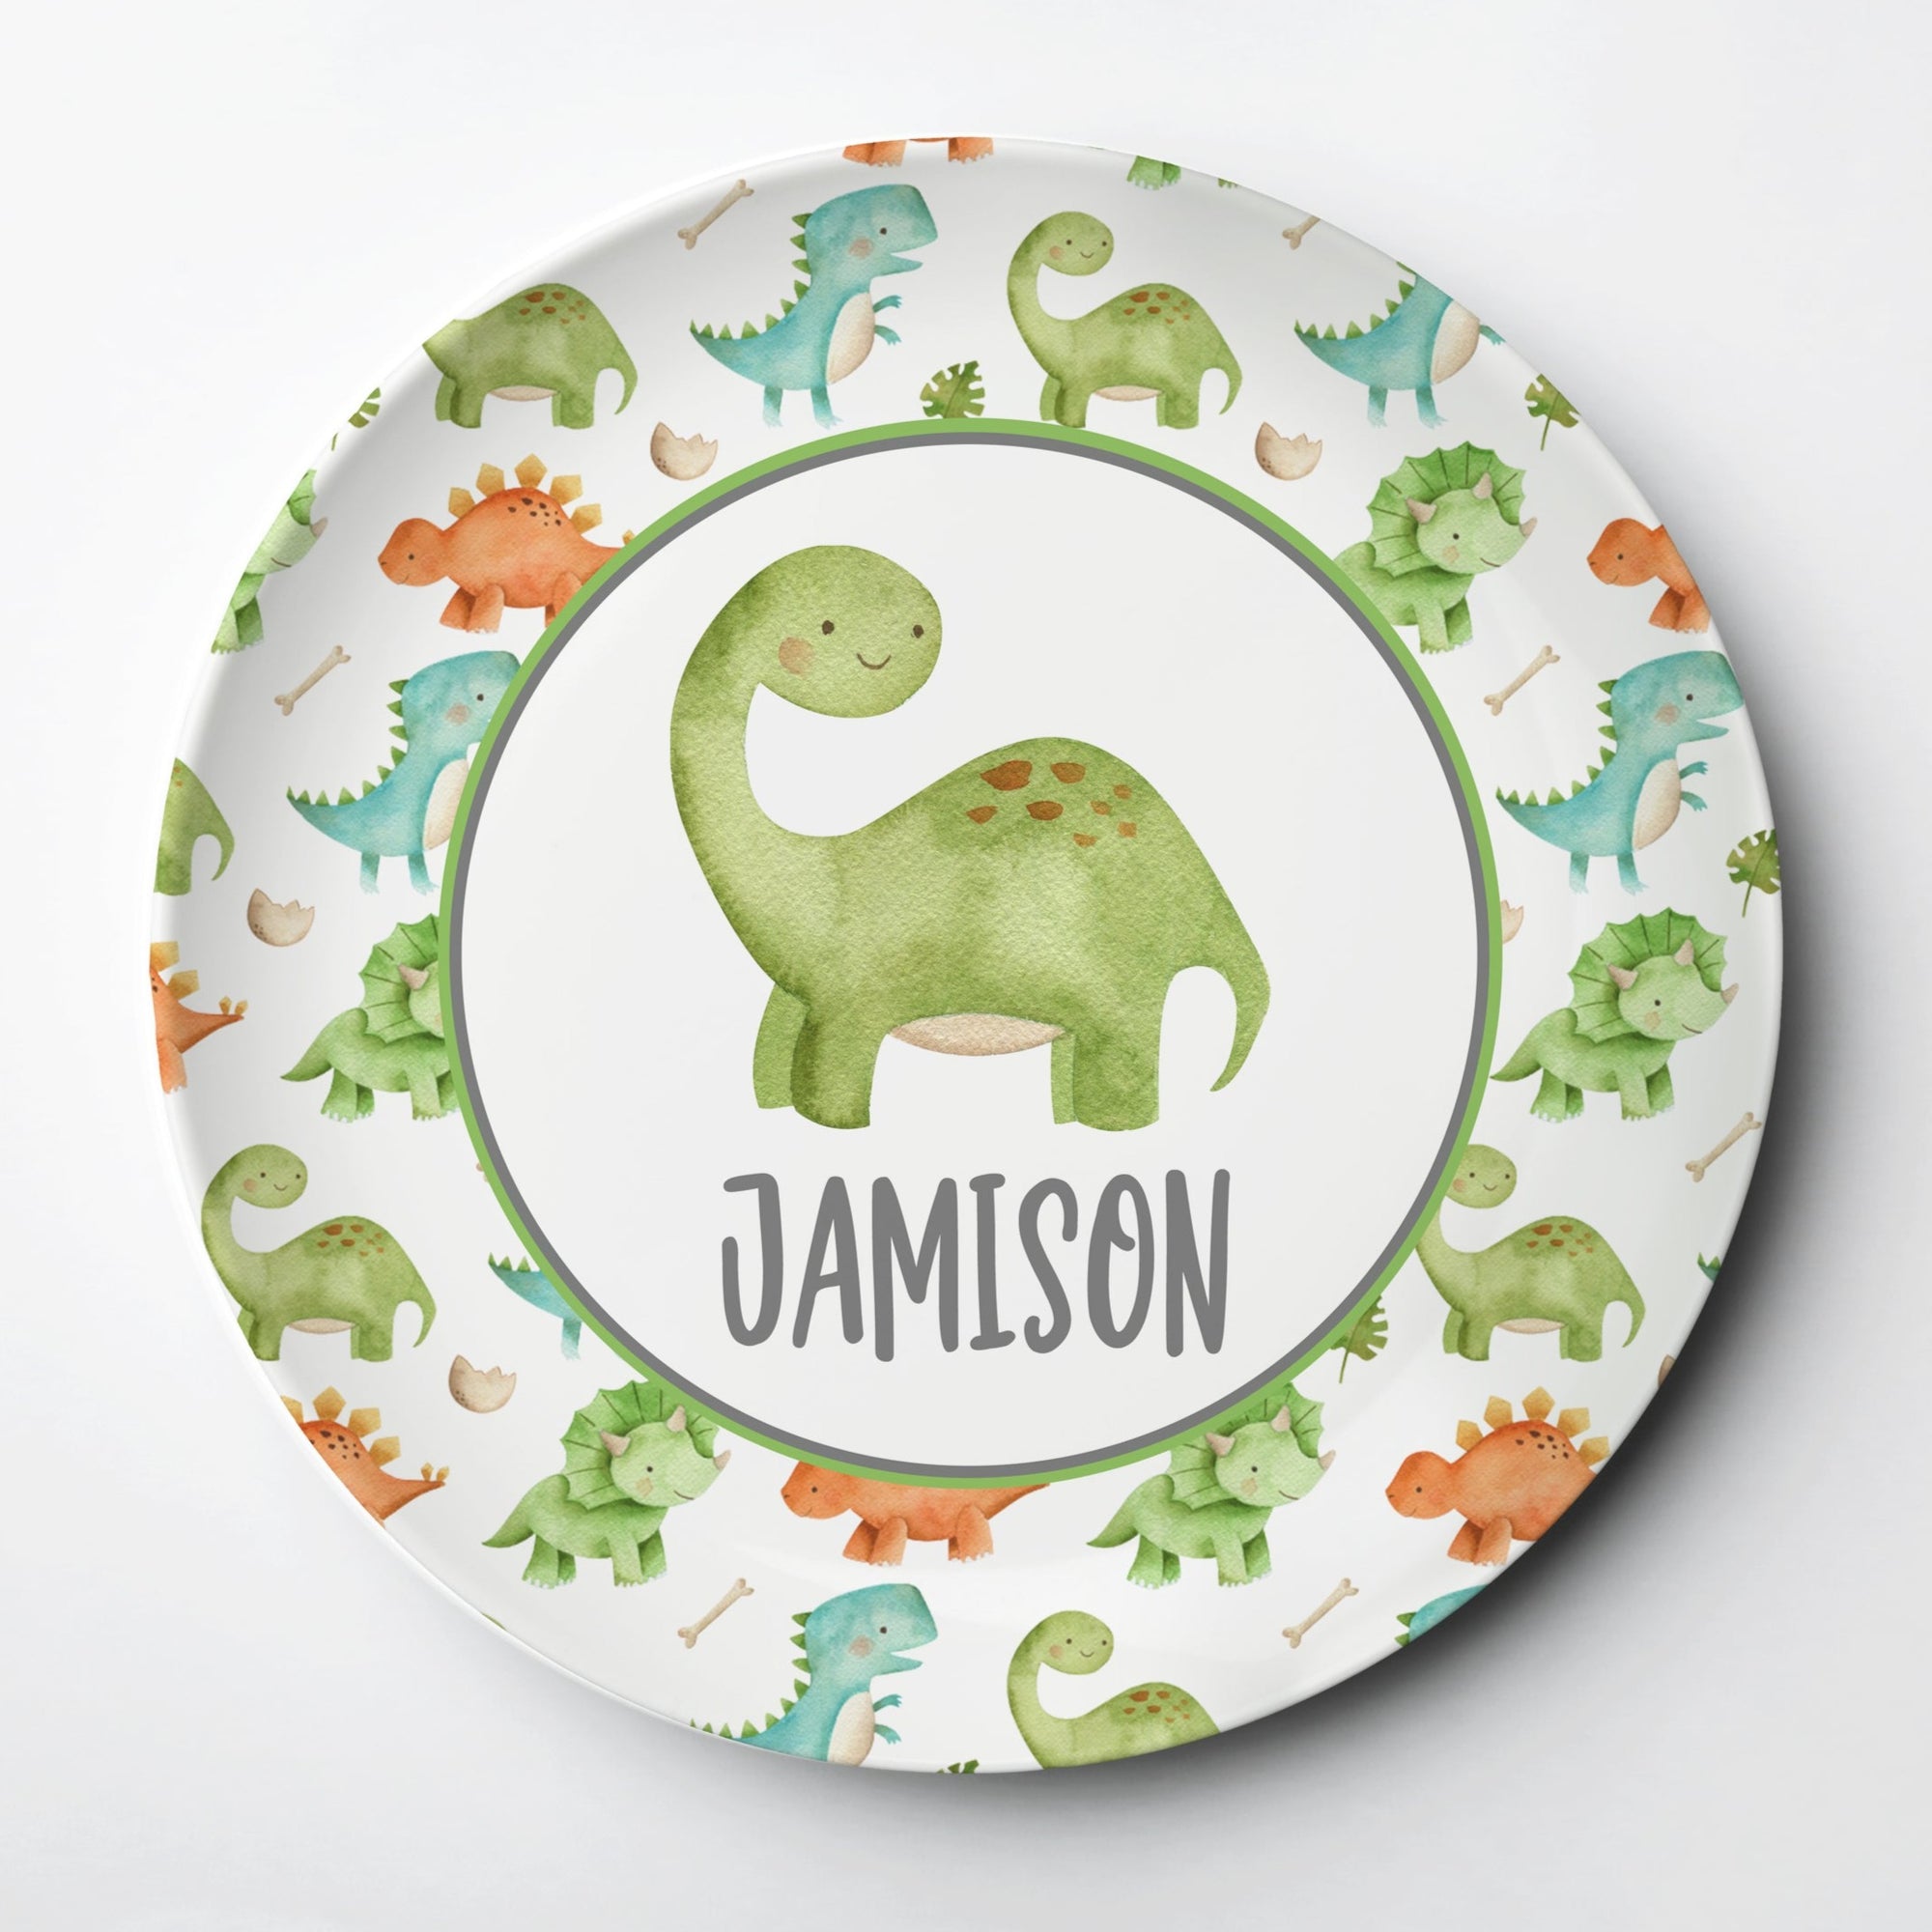 Dinosaur personalized kid plate Brontosaurus - 10" diameter, made from ThermoSāf® · Microwave, oven and dishwasher safe (any rack) · BPA, melamine and formaldehyde free · FDA food safe & made in the USA, Pipsy.com